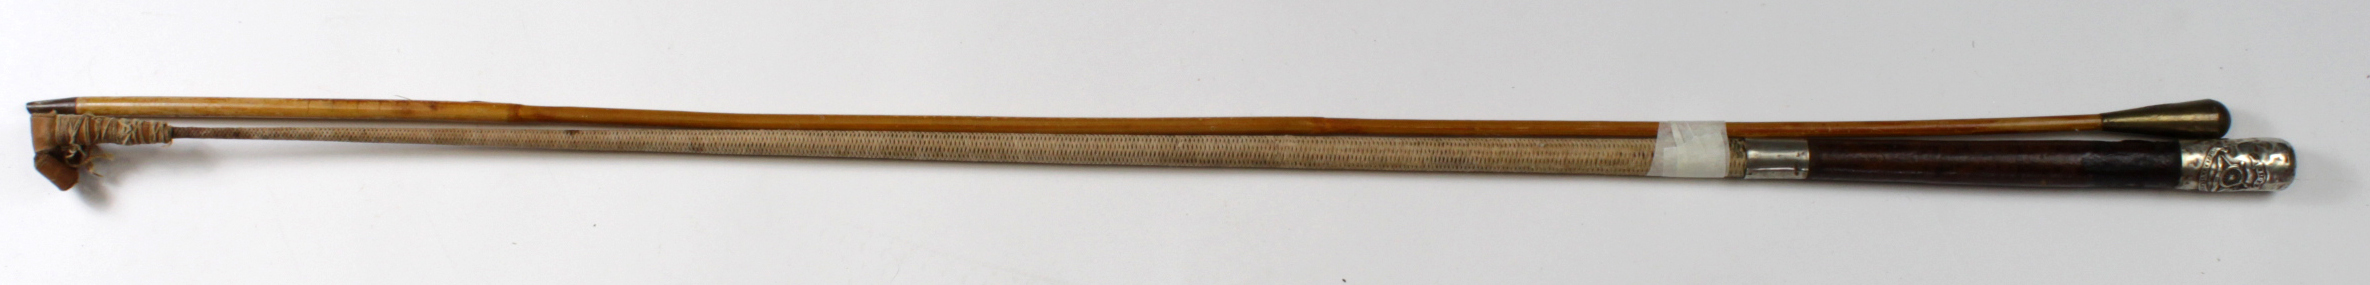 Swagger type sticks a Riding crop for the Royal Artillery and a second example. (2)